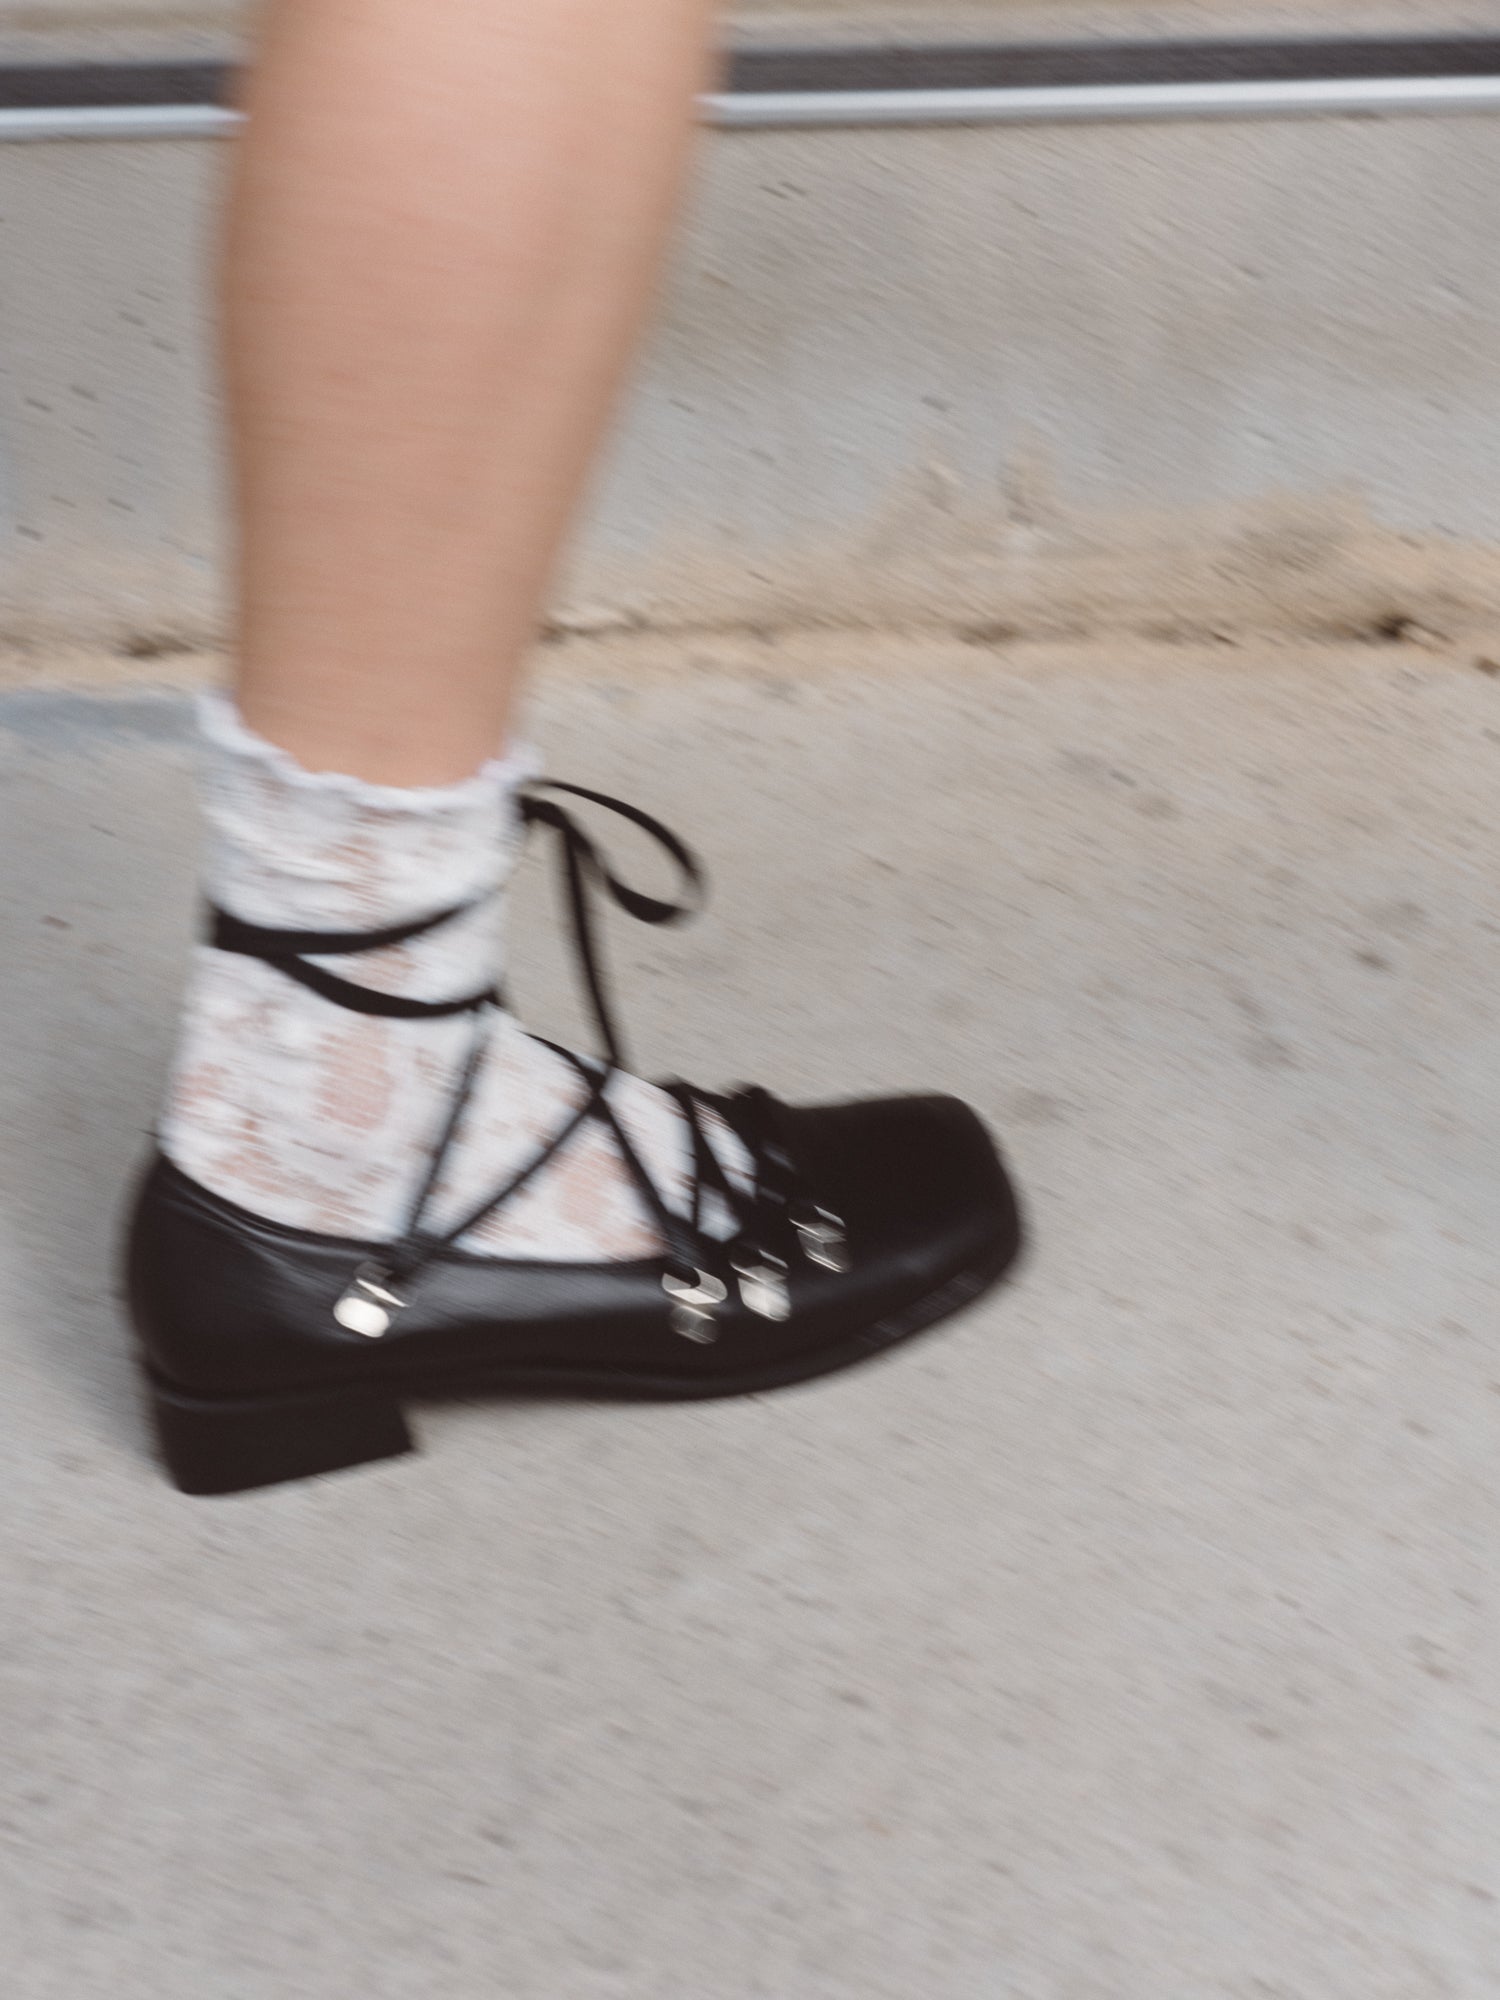 P.S.S X SYRUP LACE SOCK